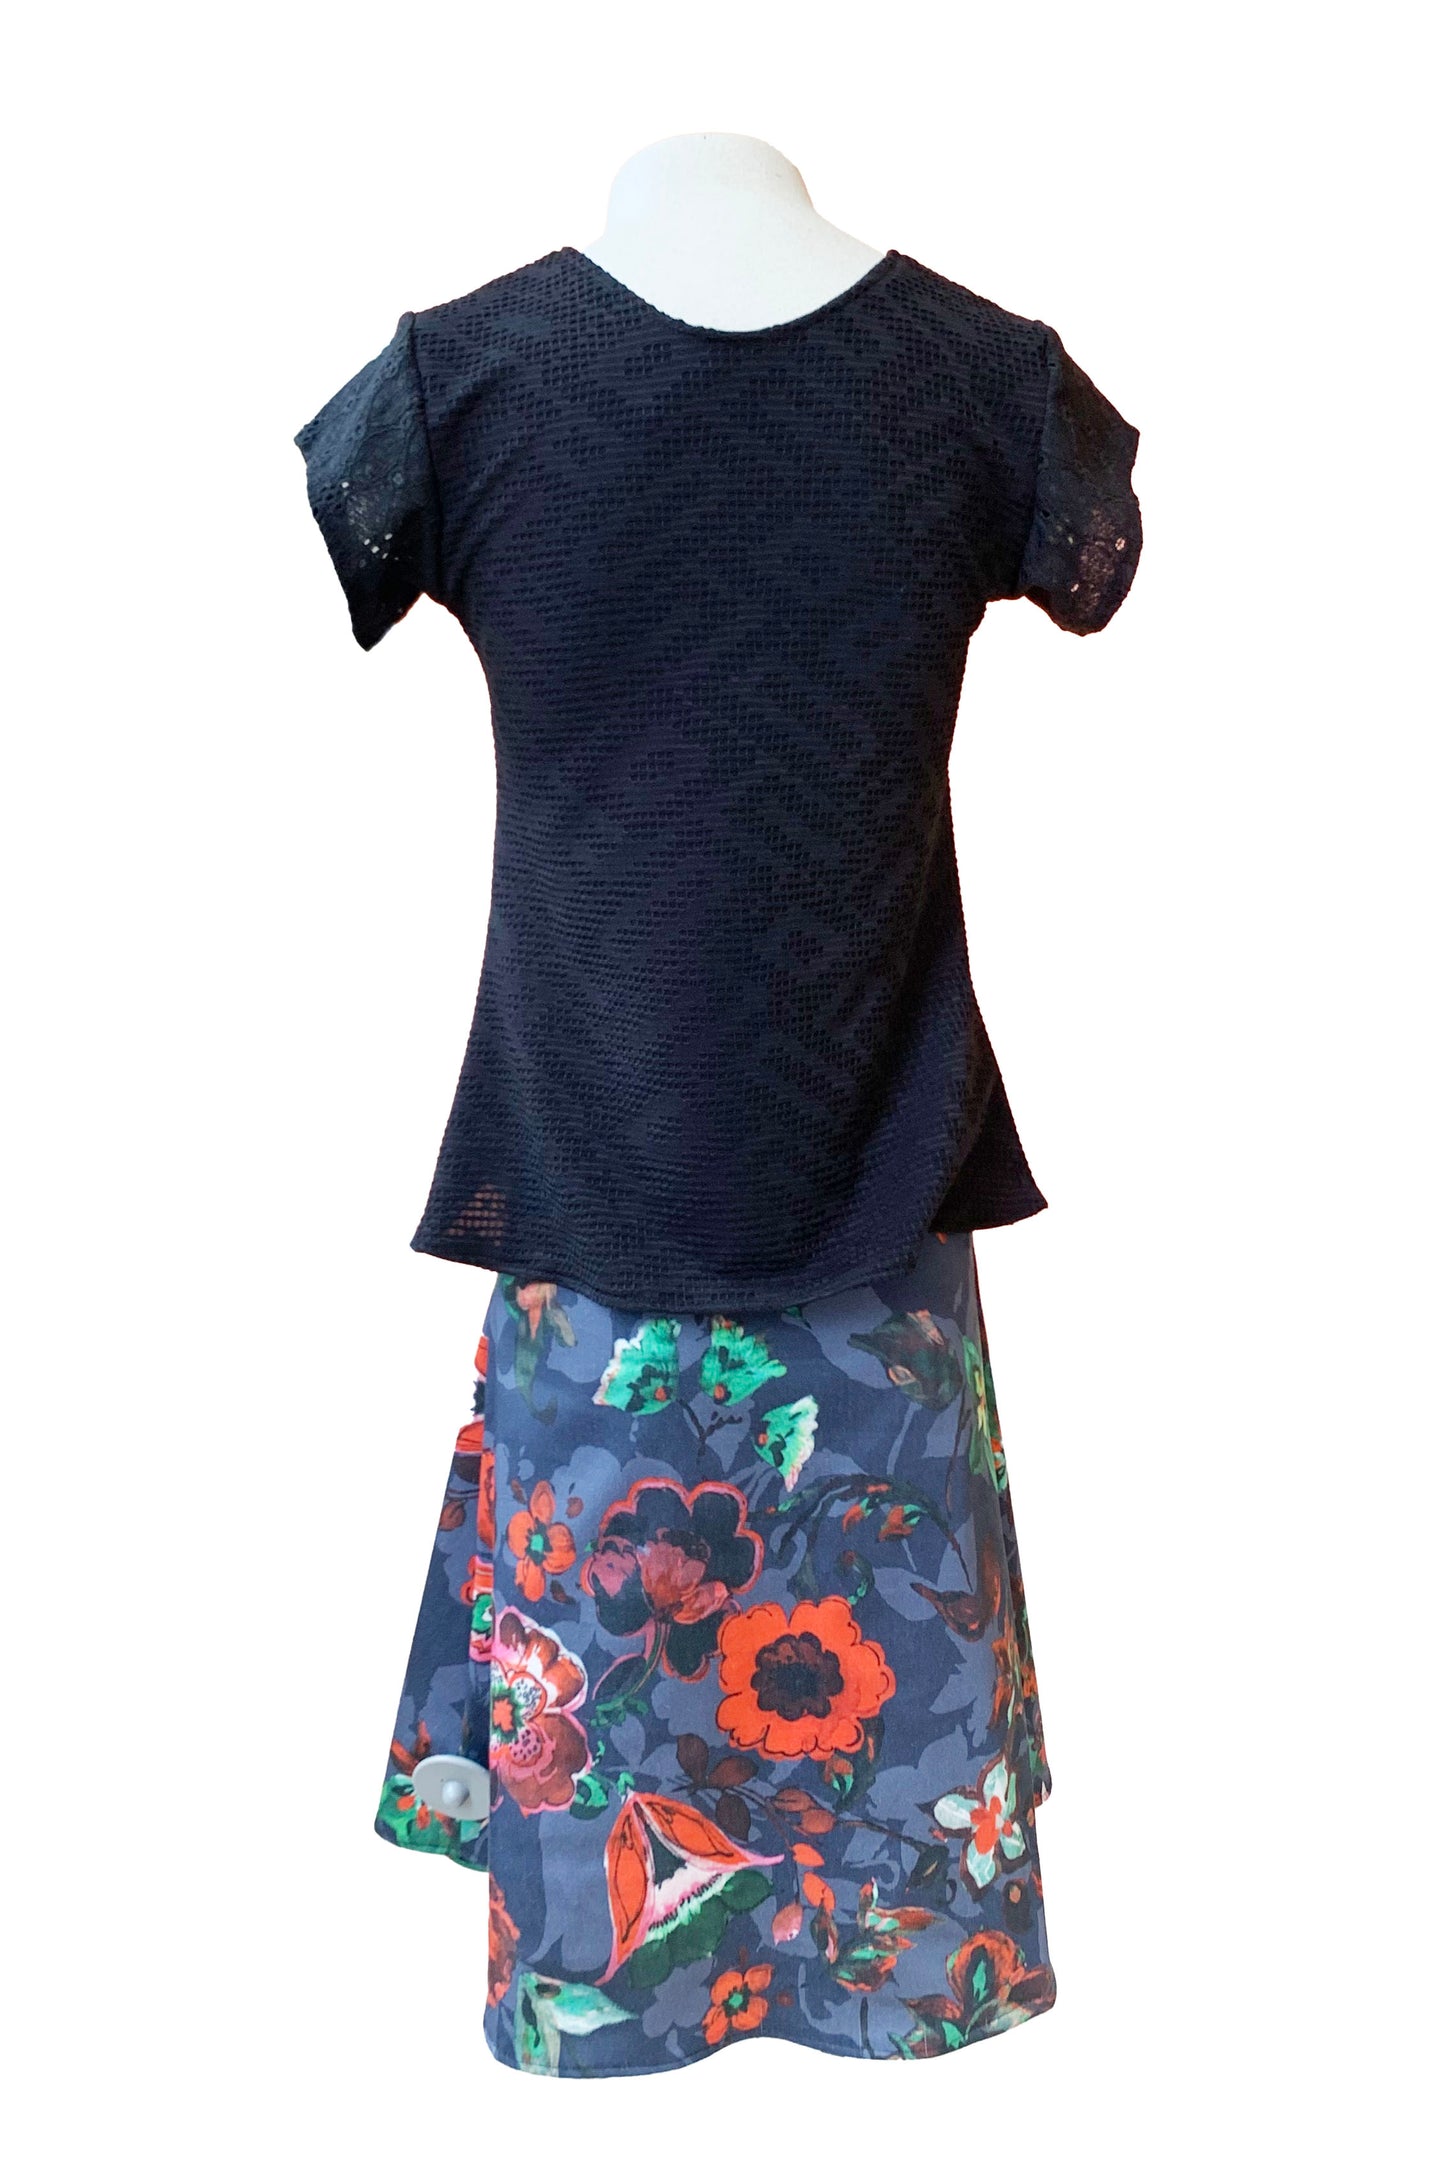 Poet Top by SI Design, Black/Blue, back view, patchwork effect with mixed fabrics, A-line shape, S-L, made in Quebec